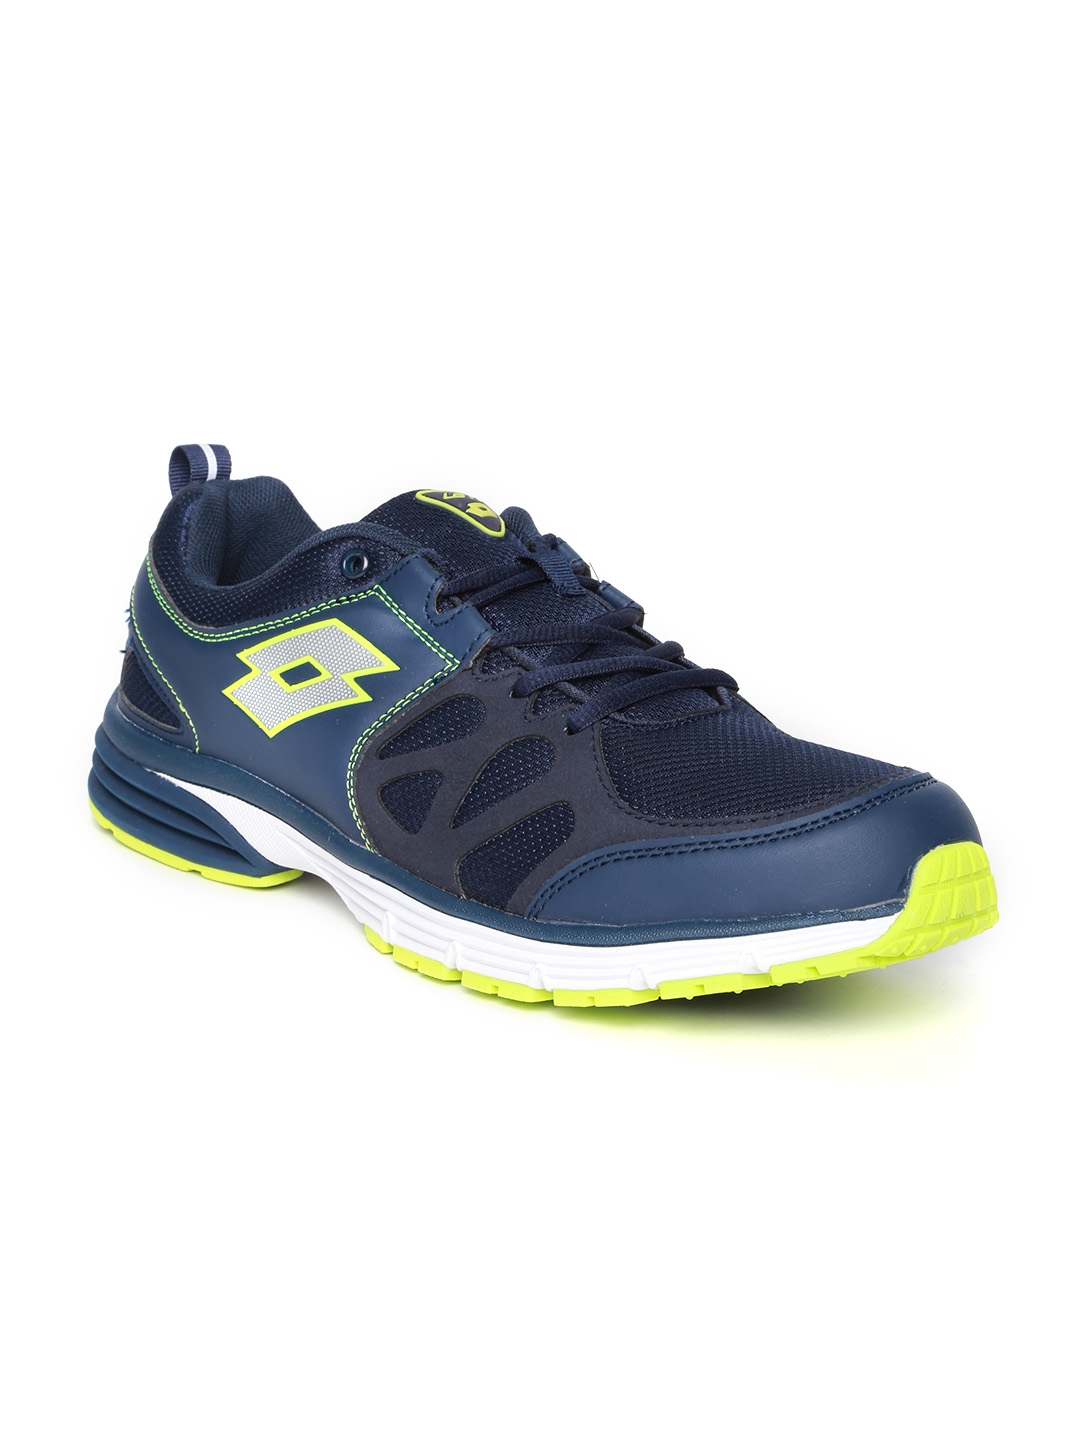 Buy Tennis shoes from Lotto online | Tennis-Point